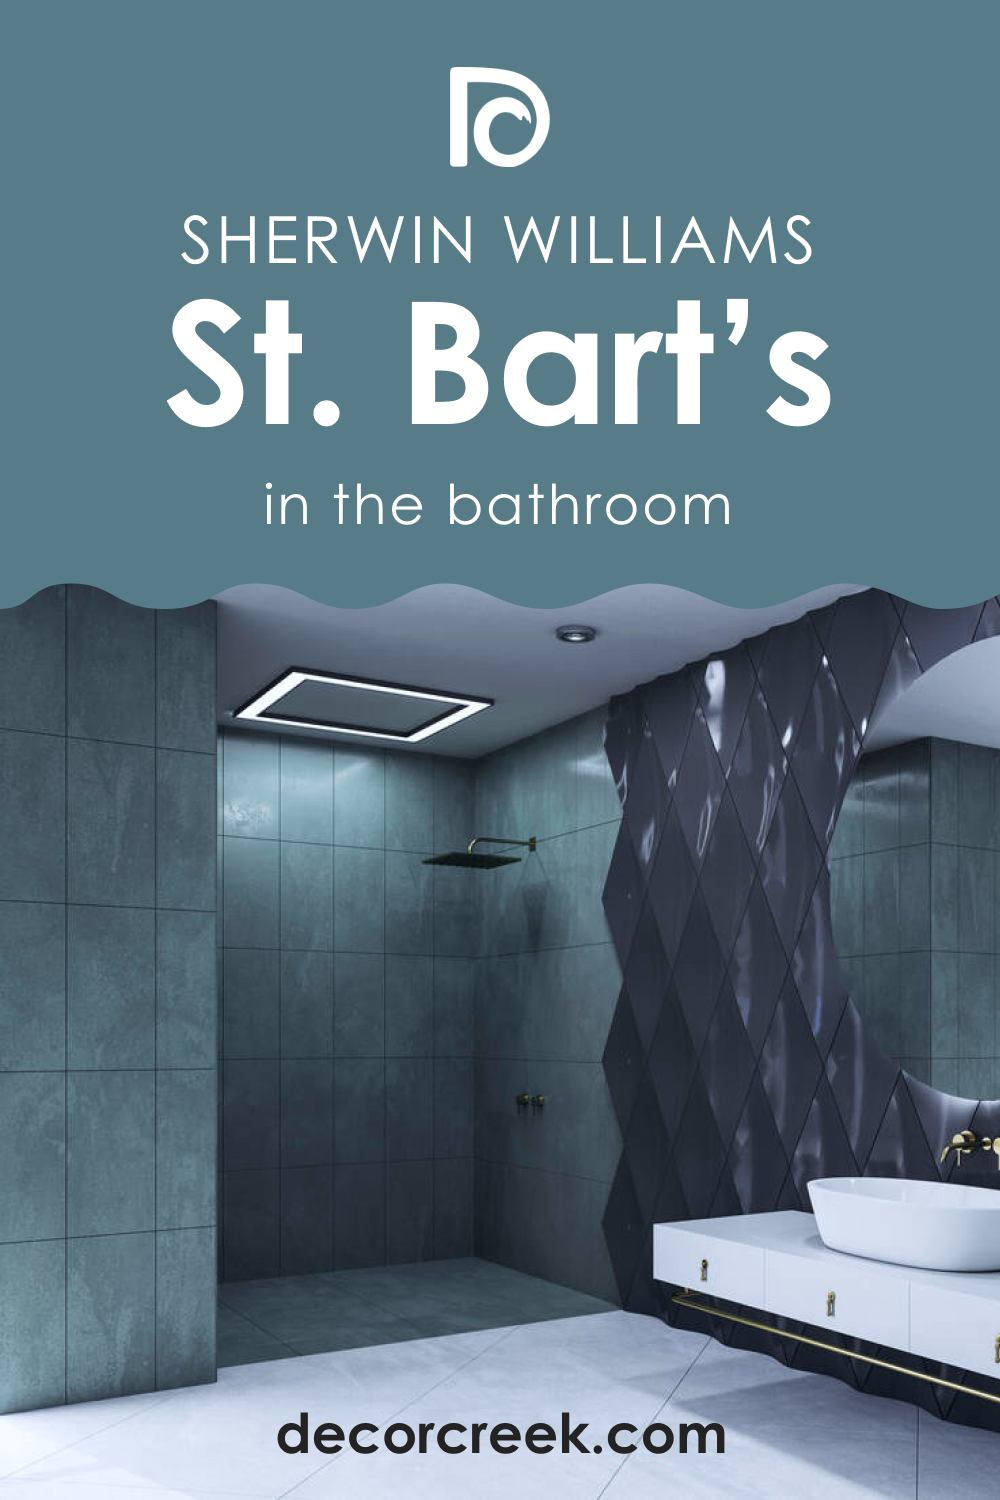 How to Use SW 7614 St. Bart’s in the Bathroom?